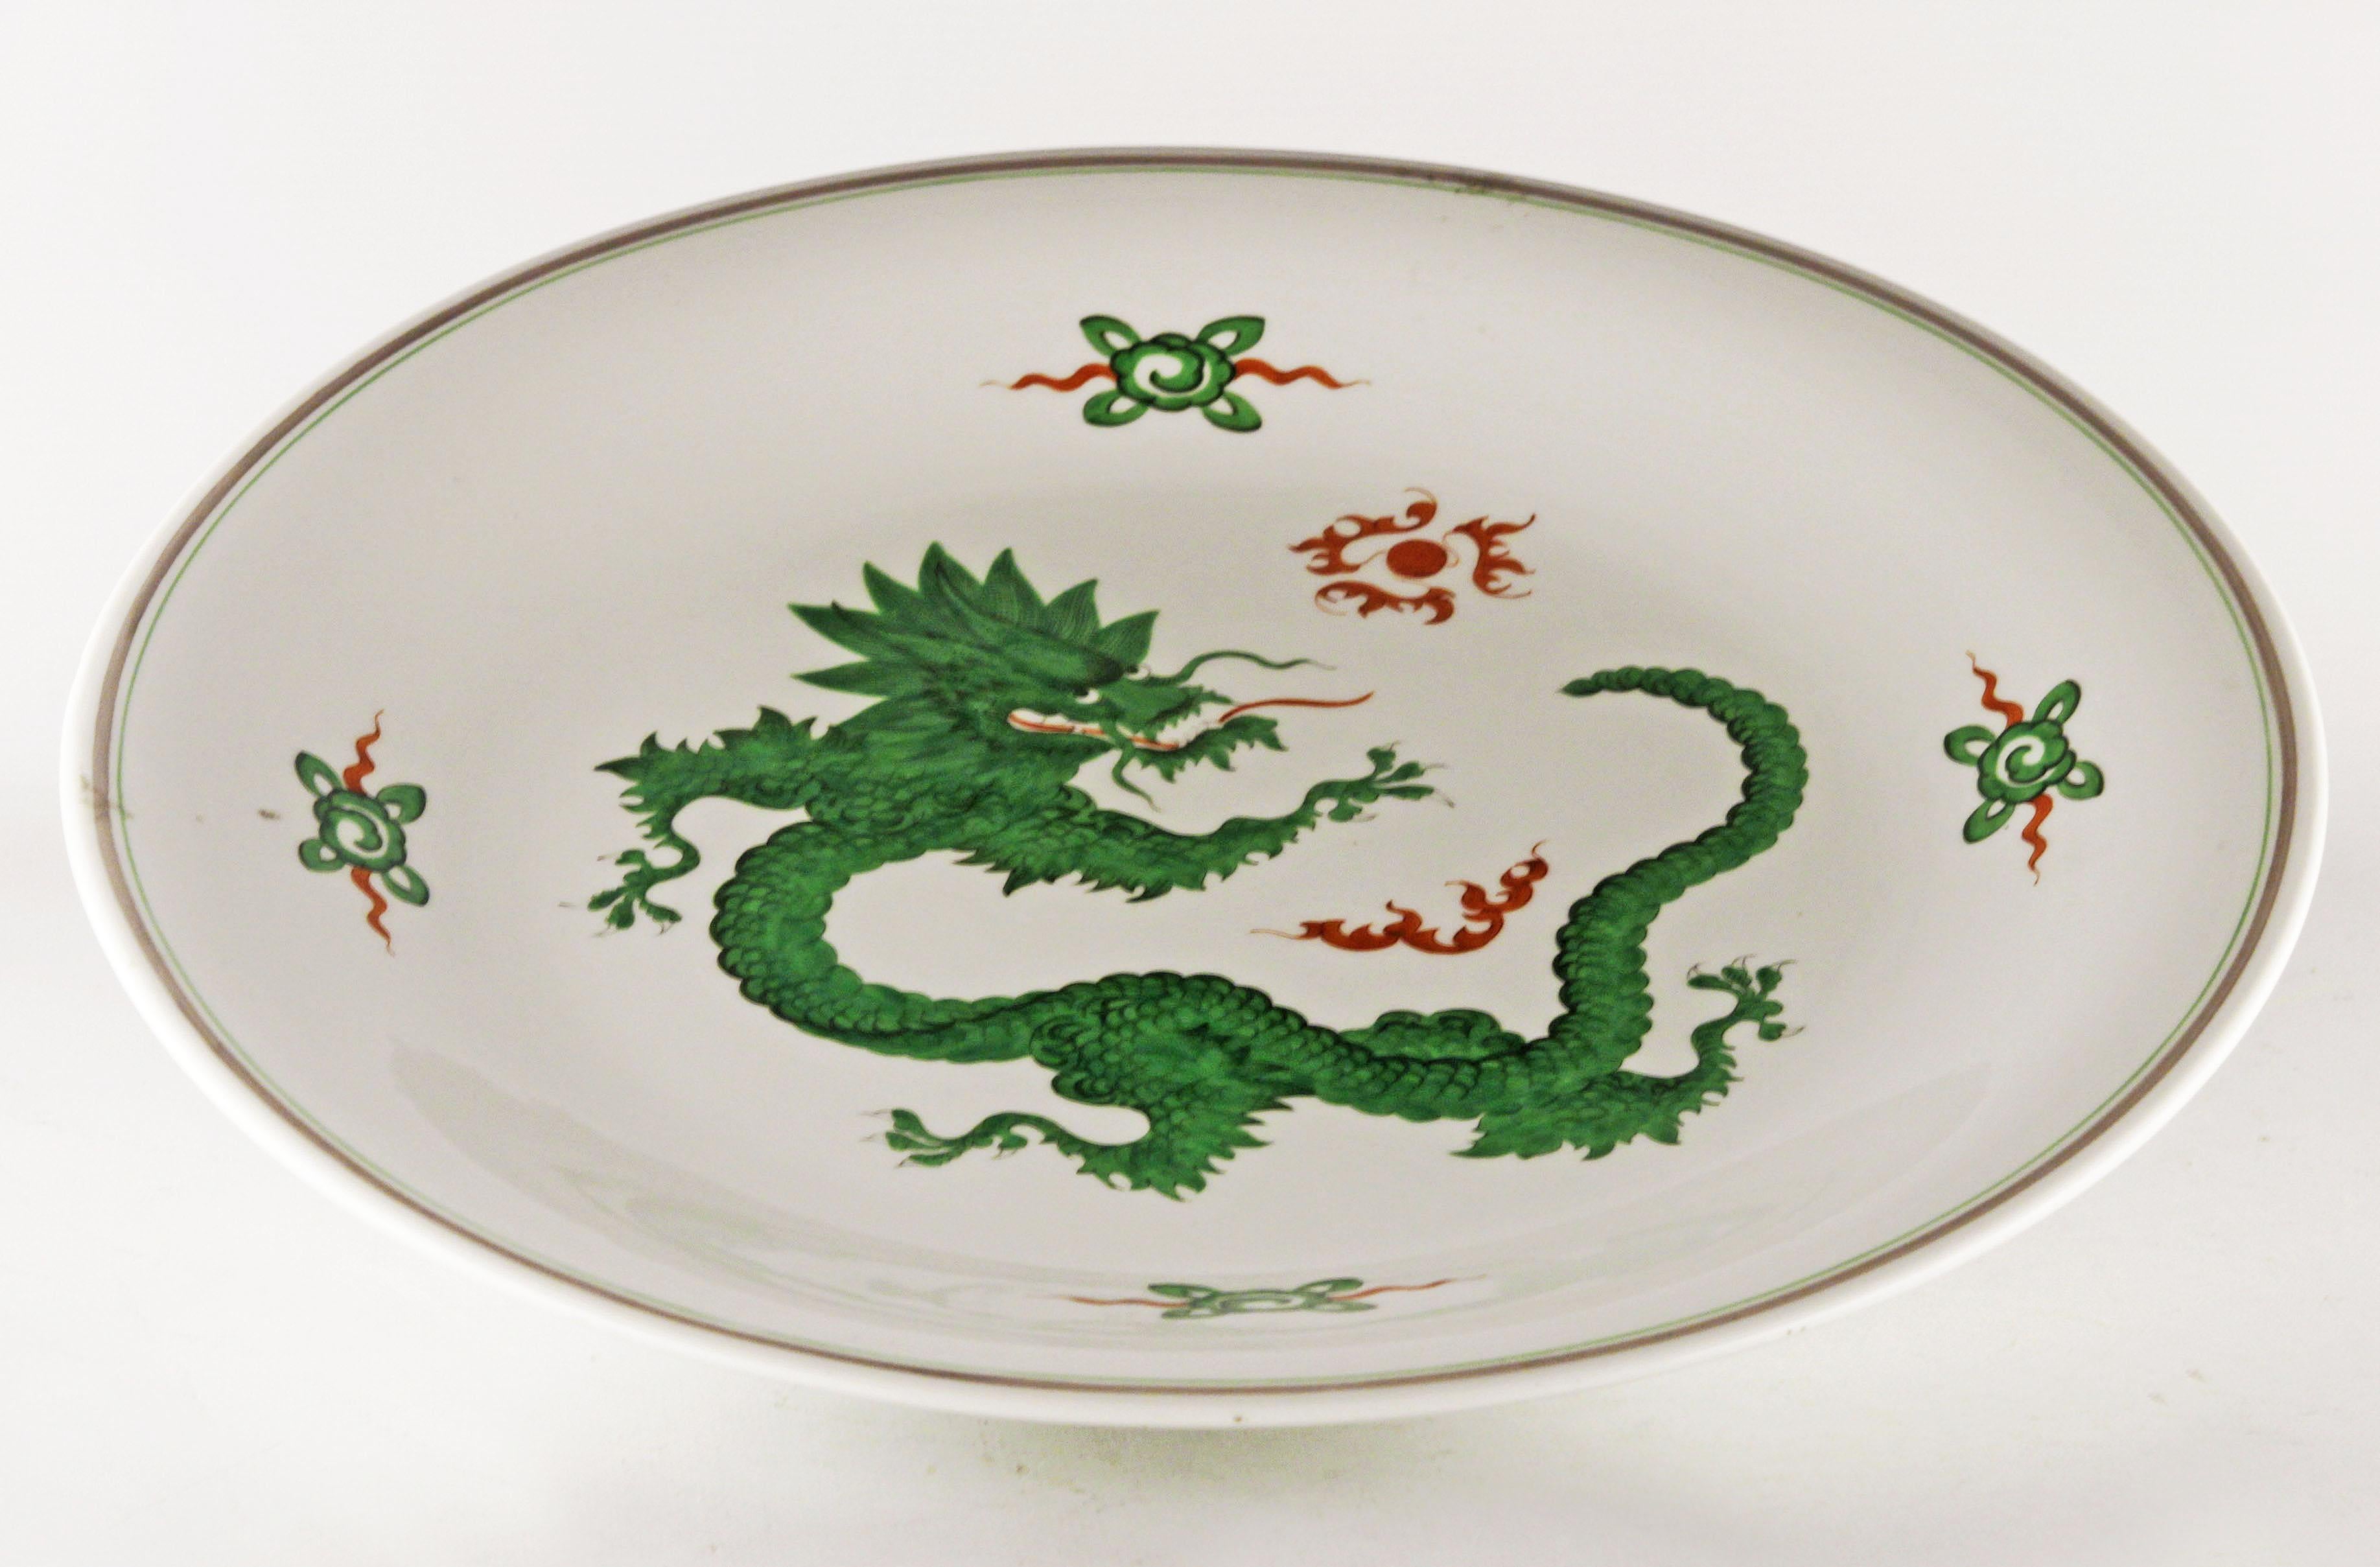 Chinoiserie german dinner plate with painted green Ming dragon by Meissen Porcelain

By: Meissen Porcelain
Material: porcelain, paint, enamel, ceramic
Technique: enameled, glazed, hand-painted, molded, painted, pressed
Dimensions: 14 in x 1.5